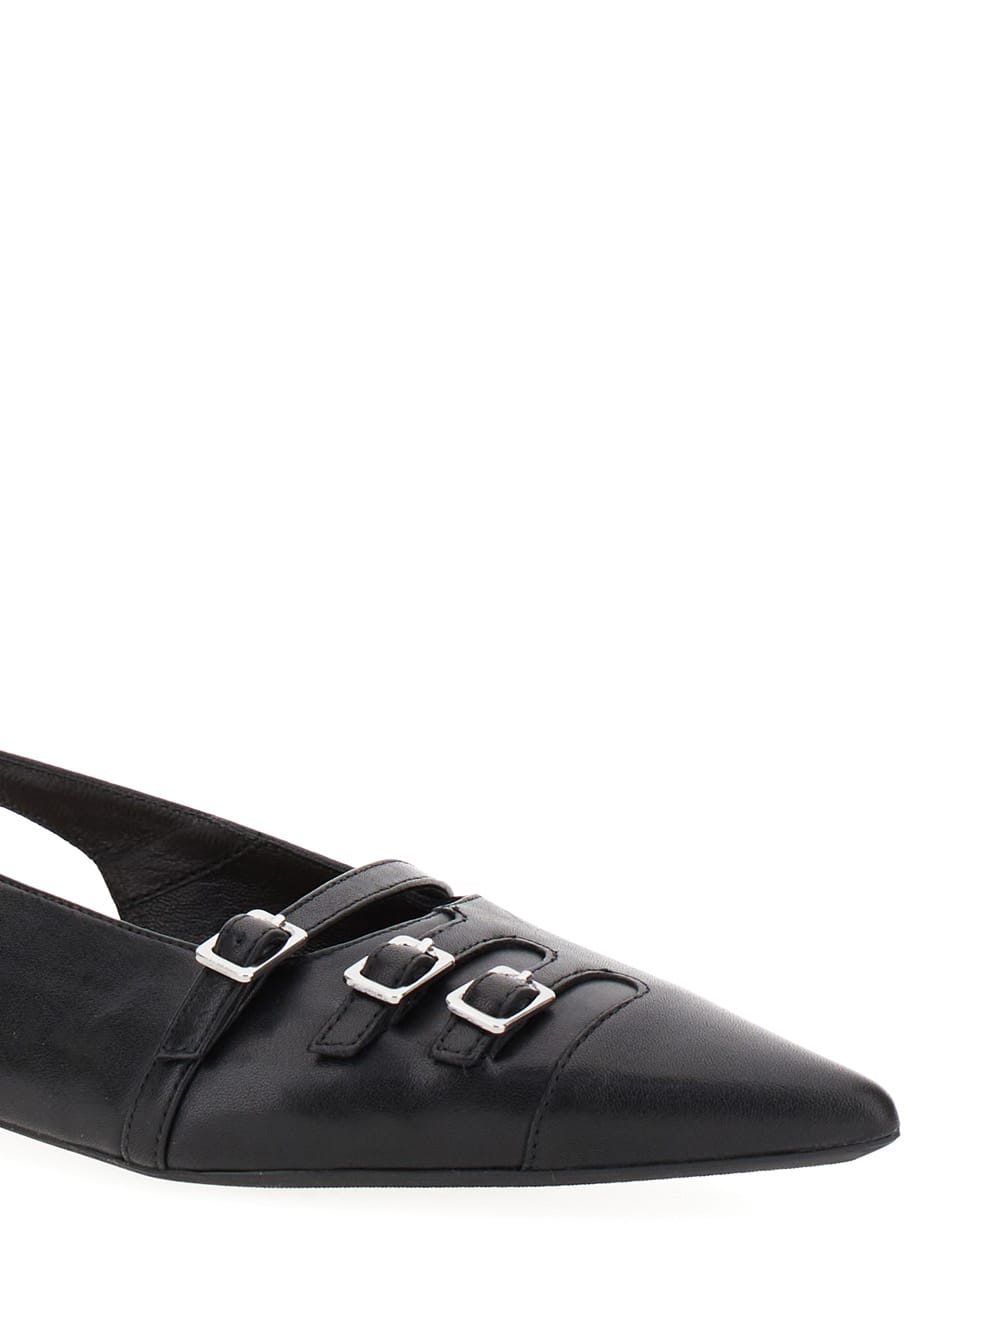 Shop Vagabond Hermine Black Slingback Ballet Flats With Decorative Buckles In Leather Woman